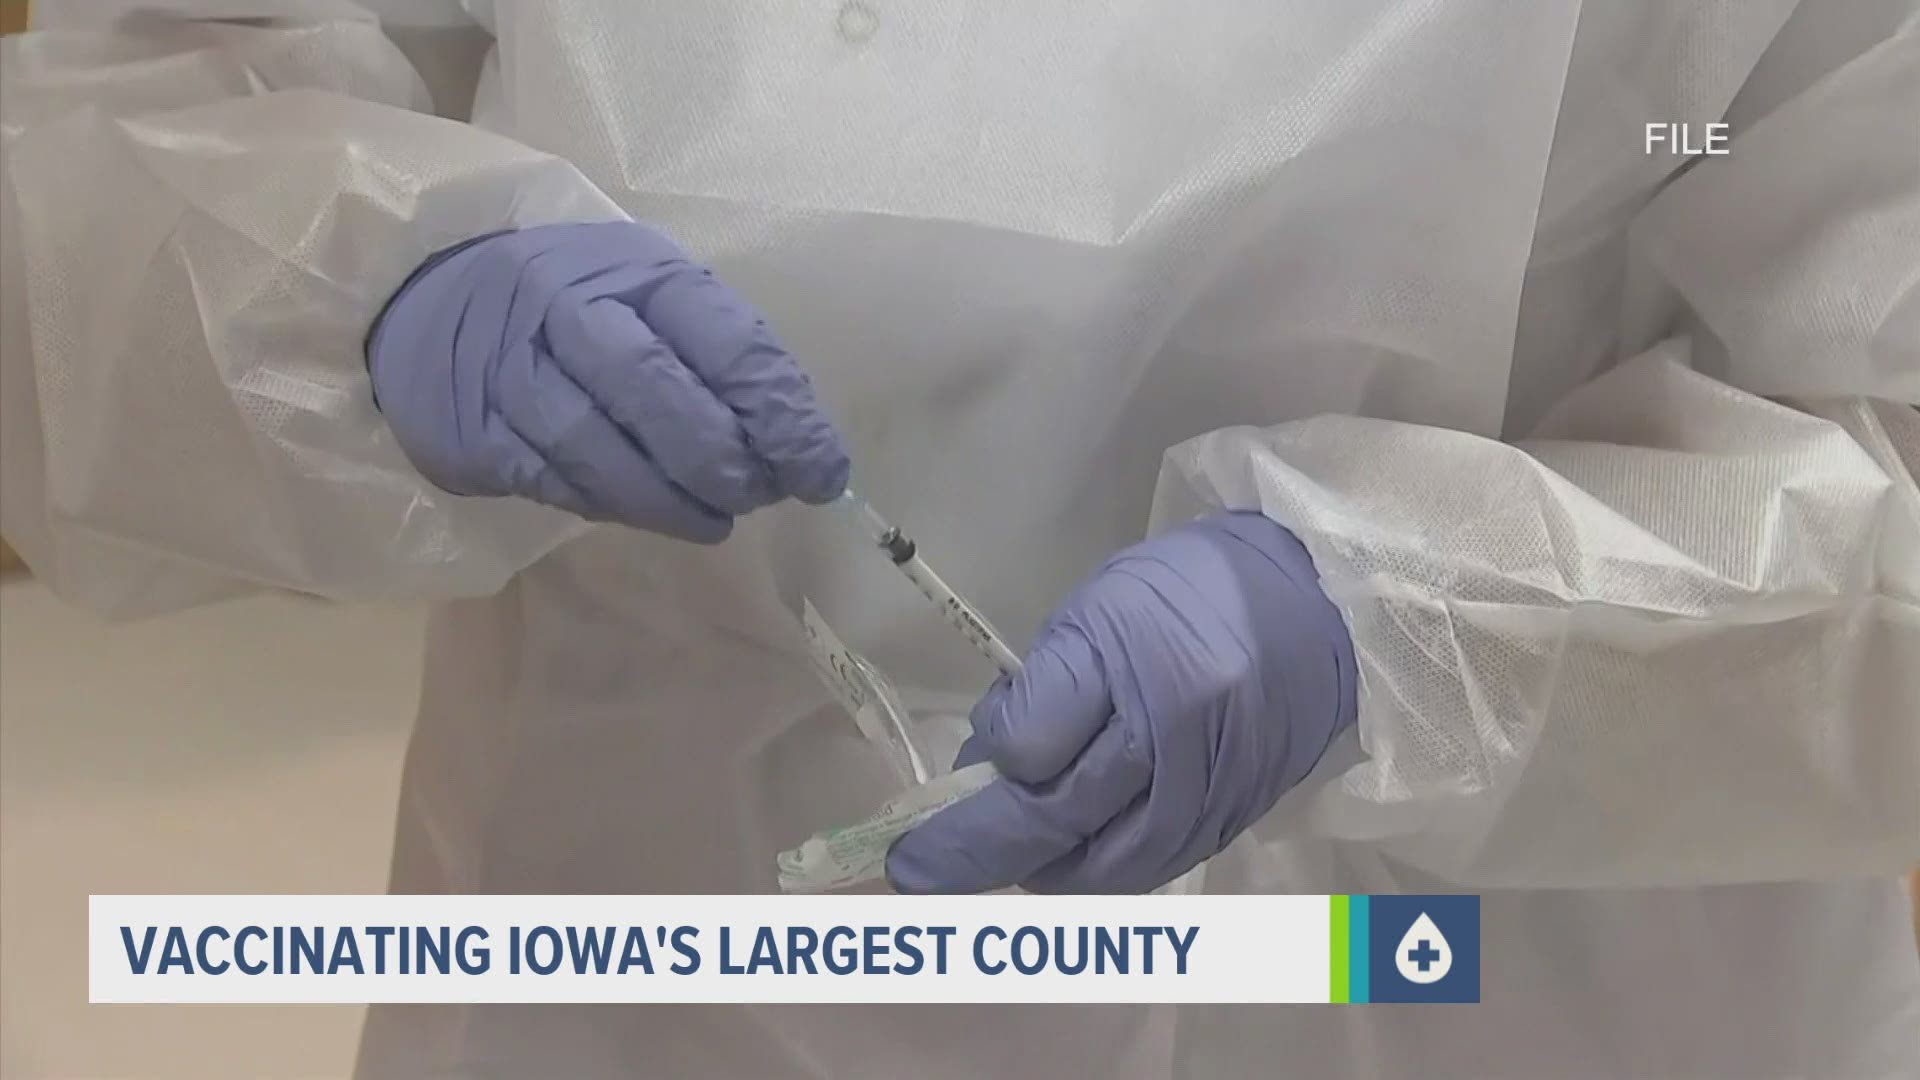 Polk County Emergency Management says the county has the capability of vaccinating 50,000 Iowans a week, but they would first require an excess of doses.